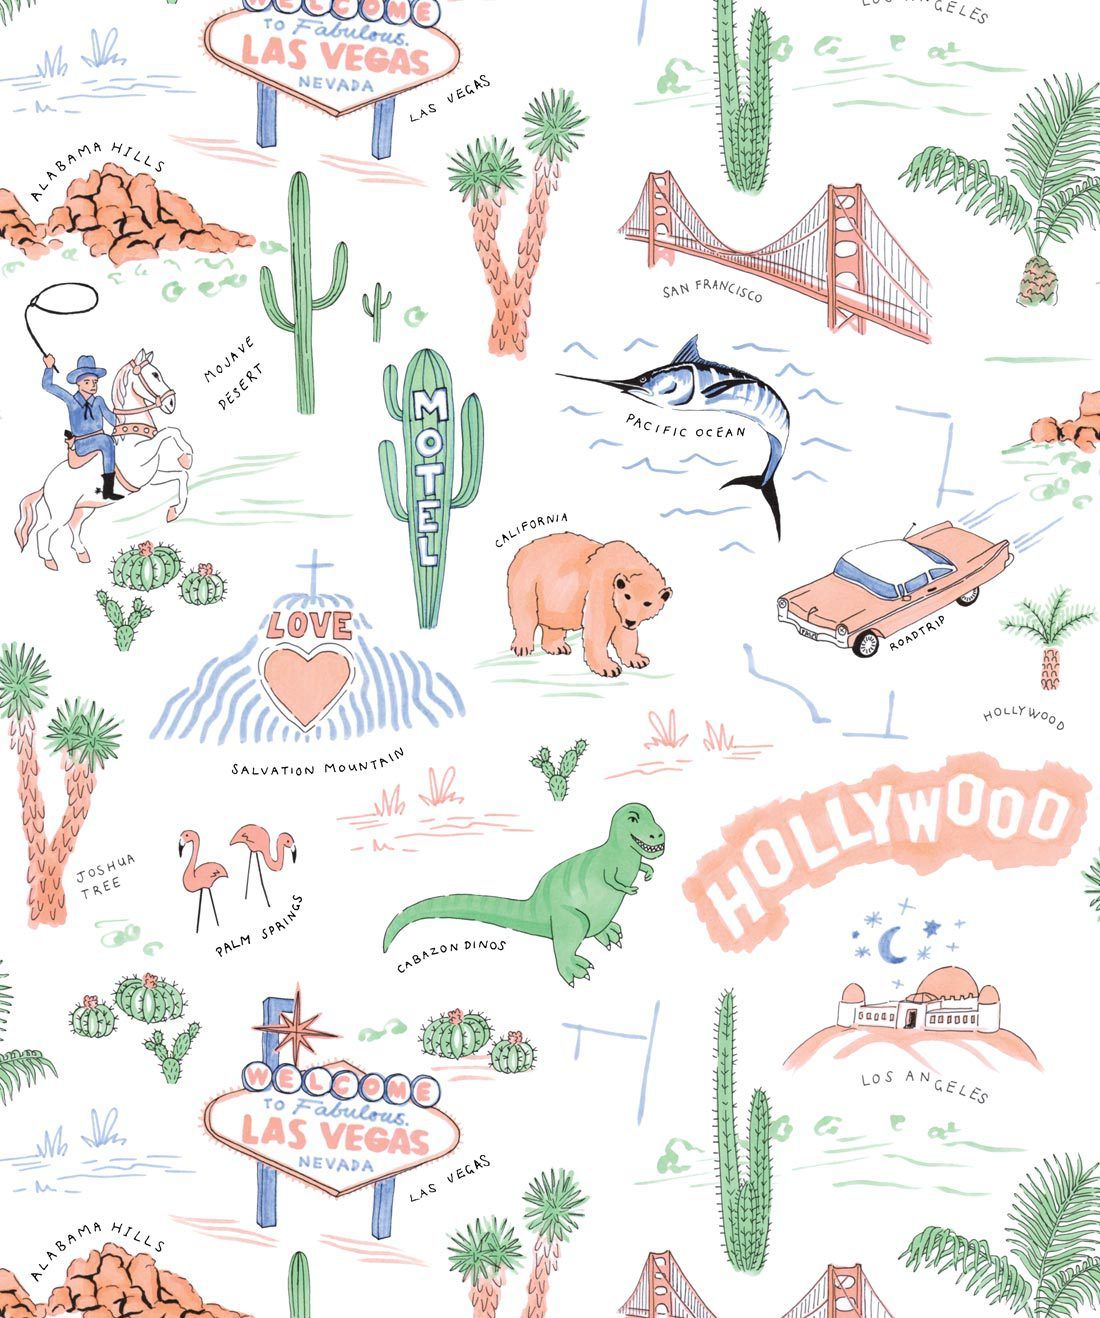 The Road Trip is an American retro wallpaper